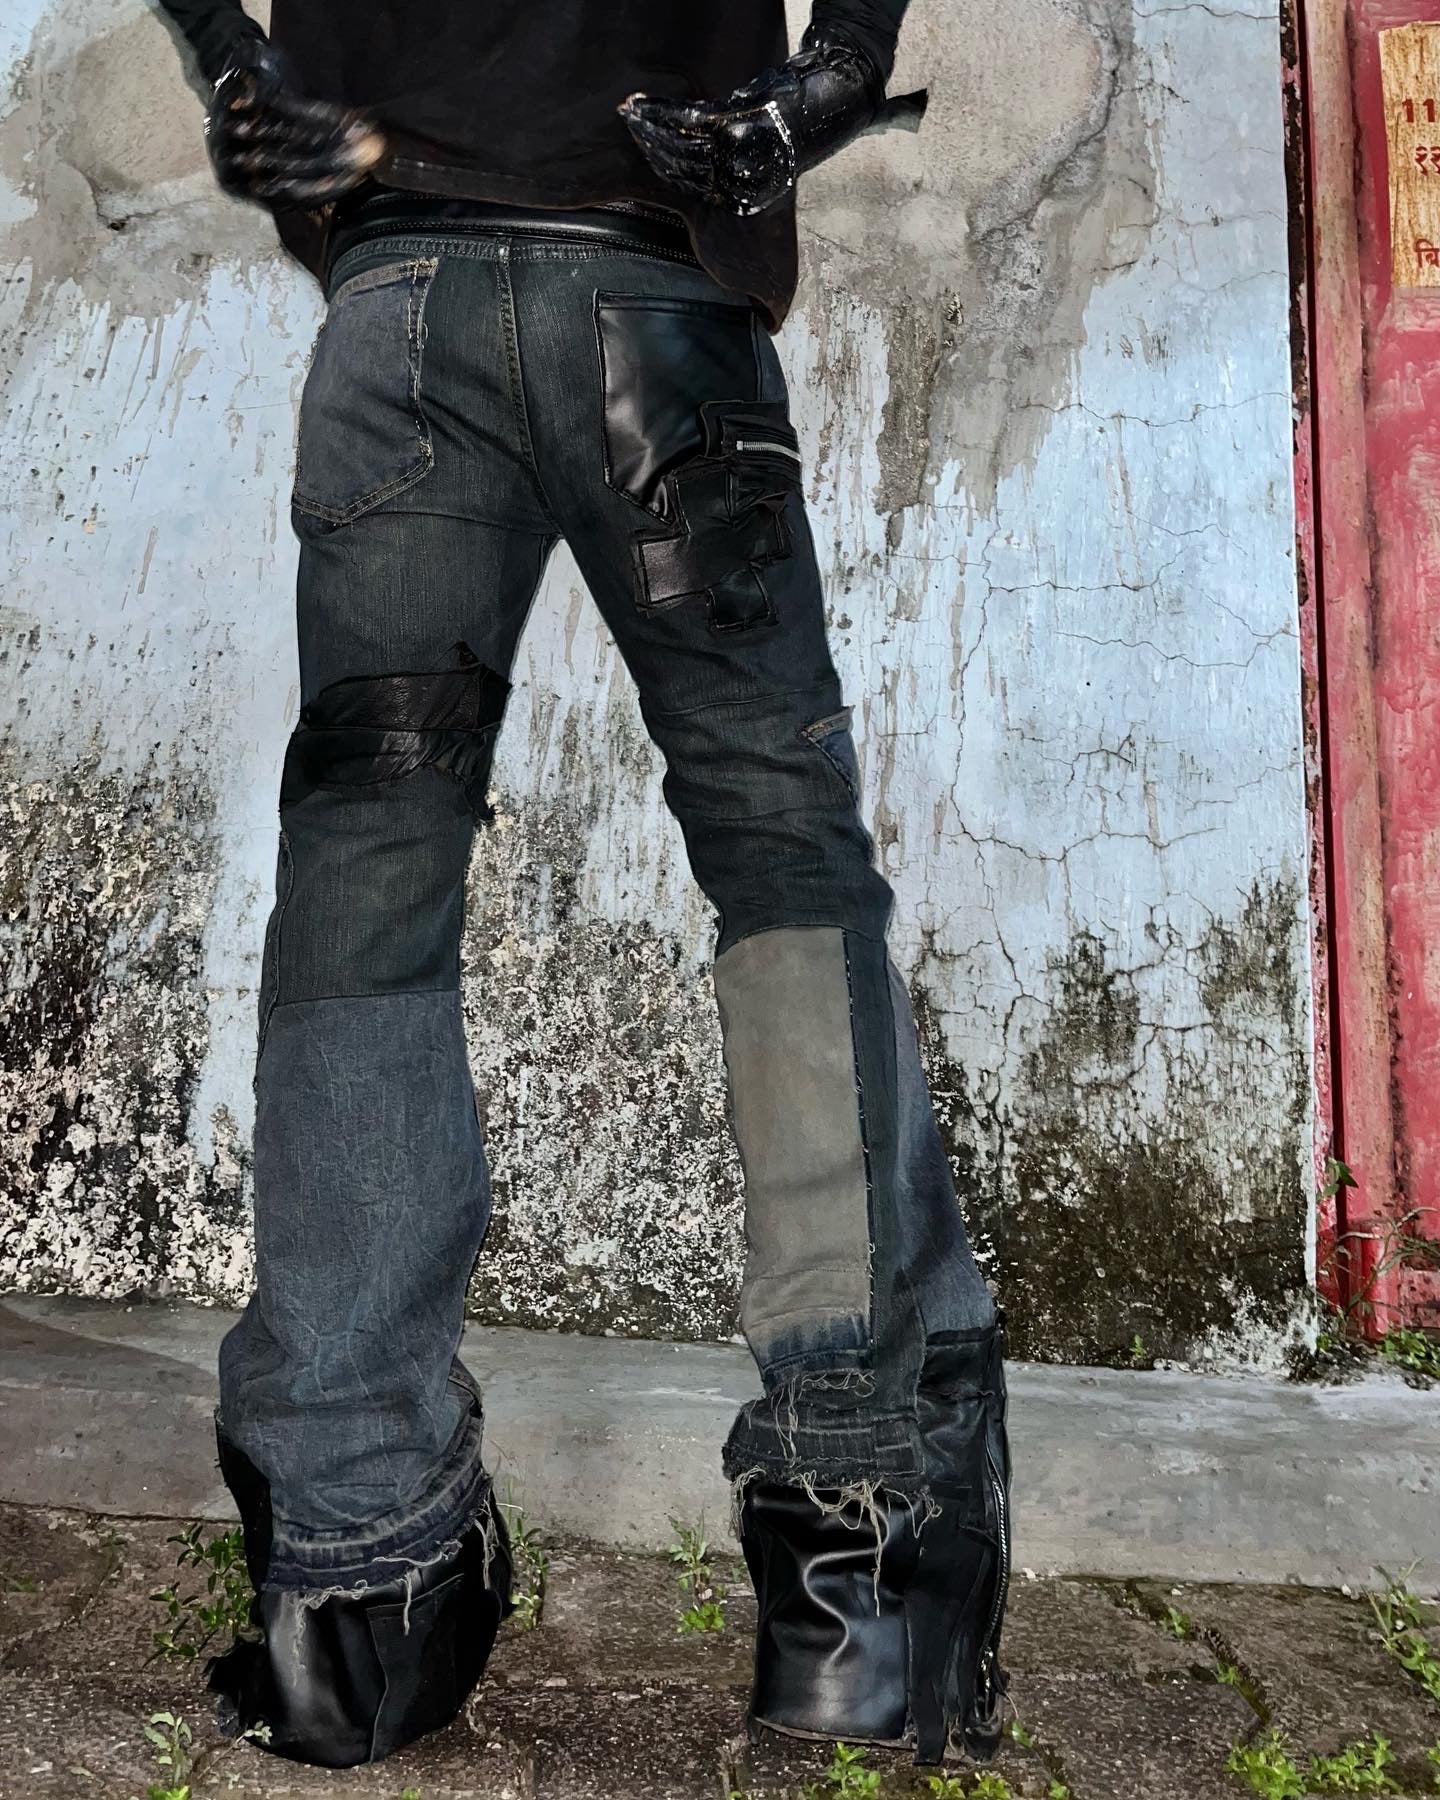 Leather/ Denim Hybrid Reconstructed Flared Jeans